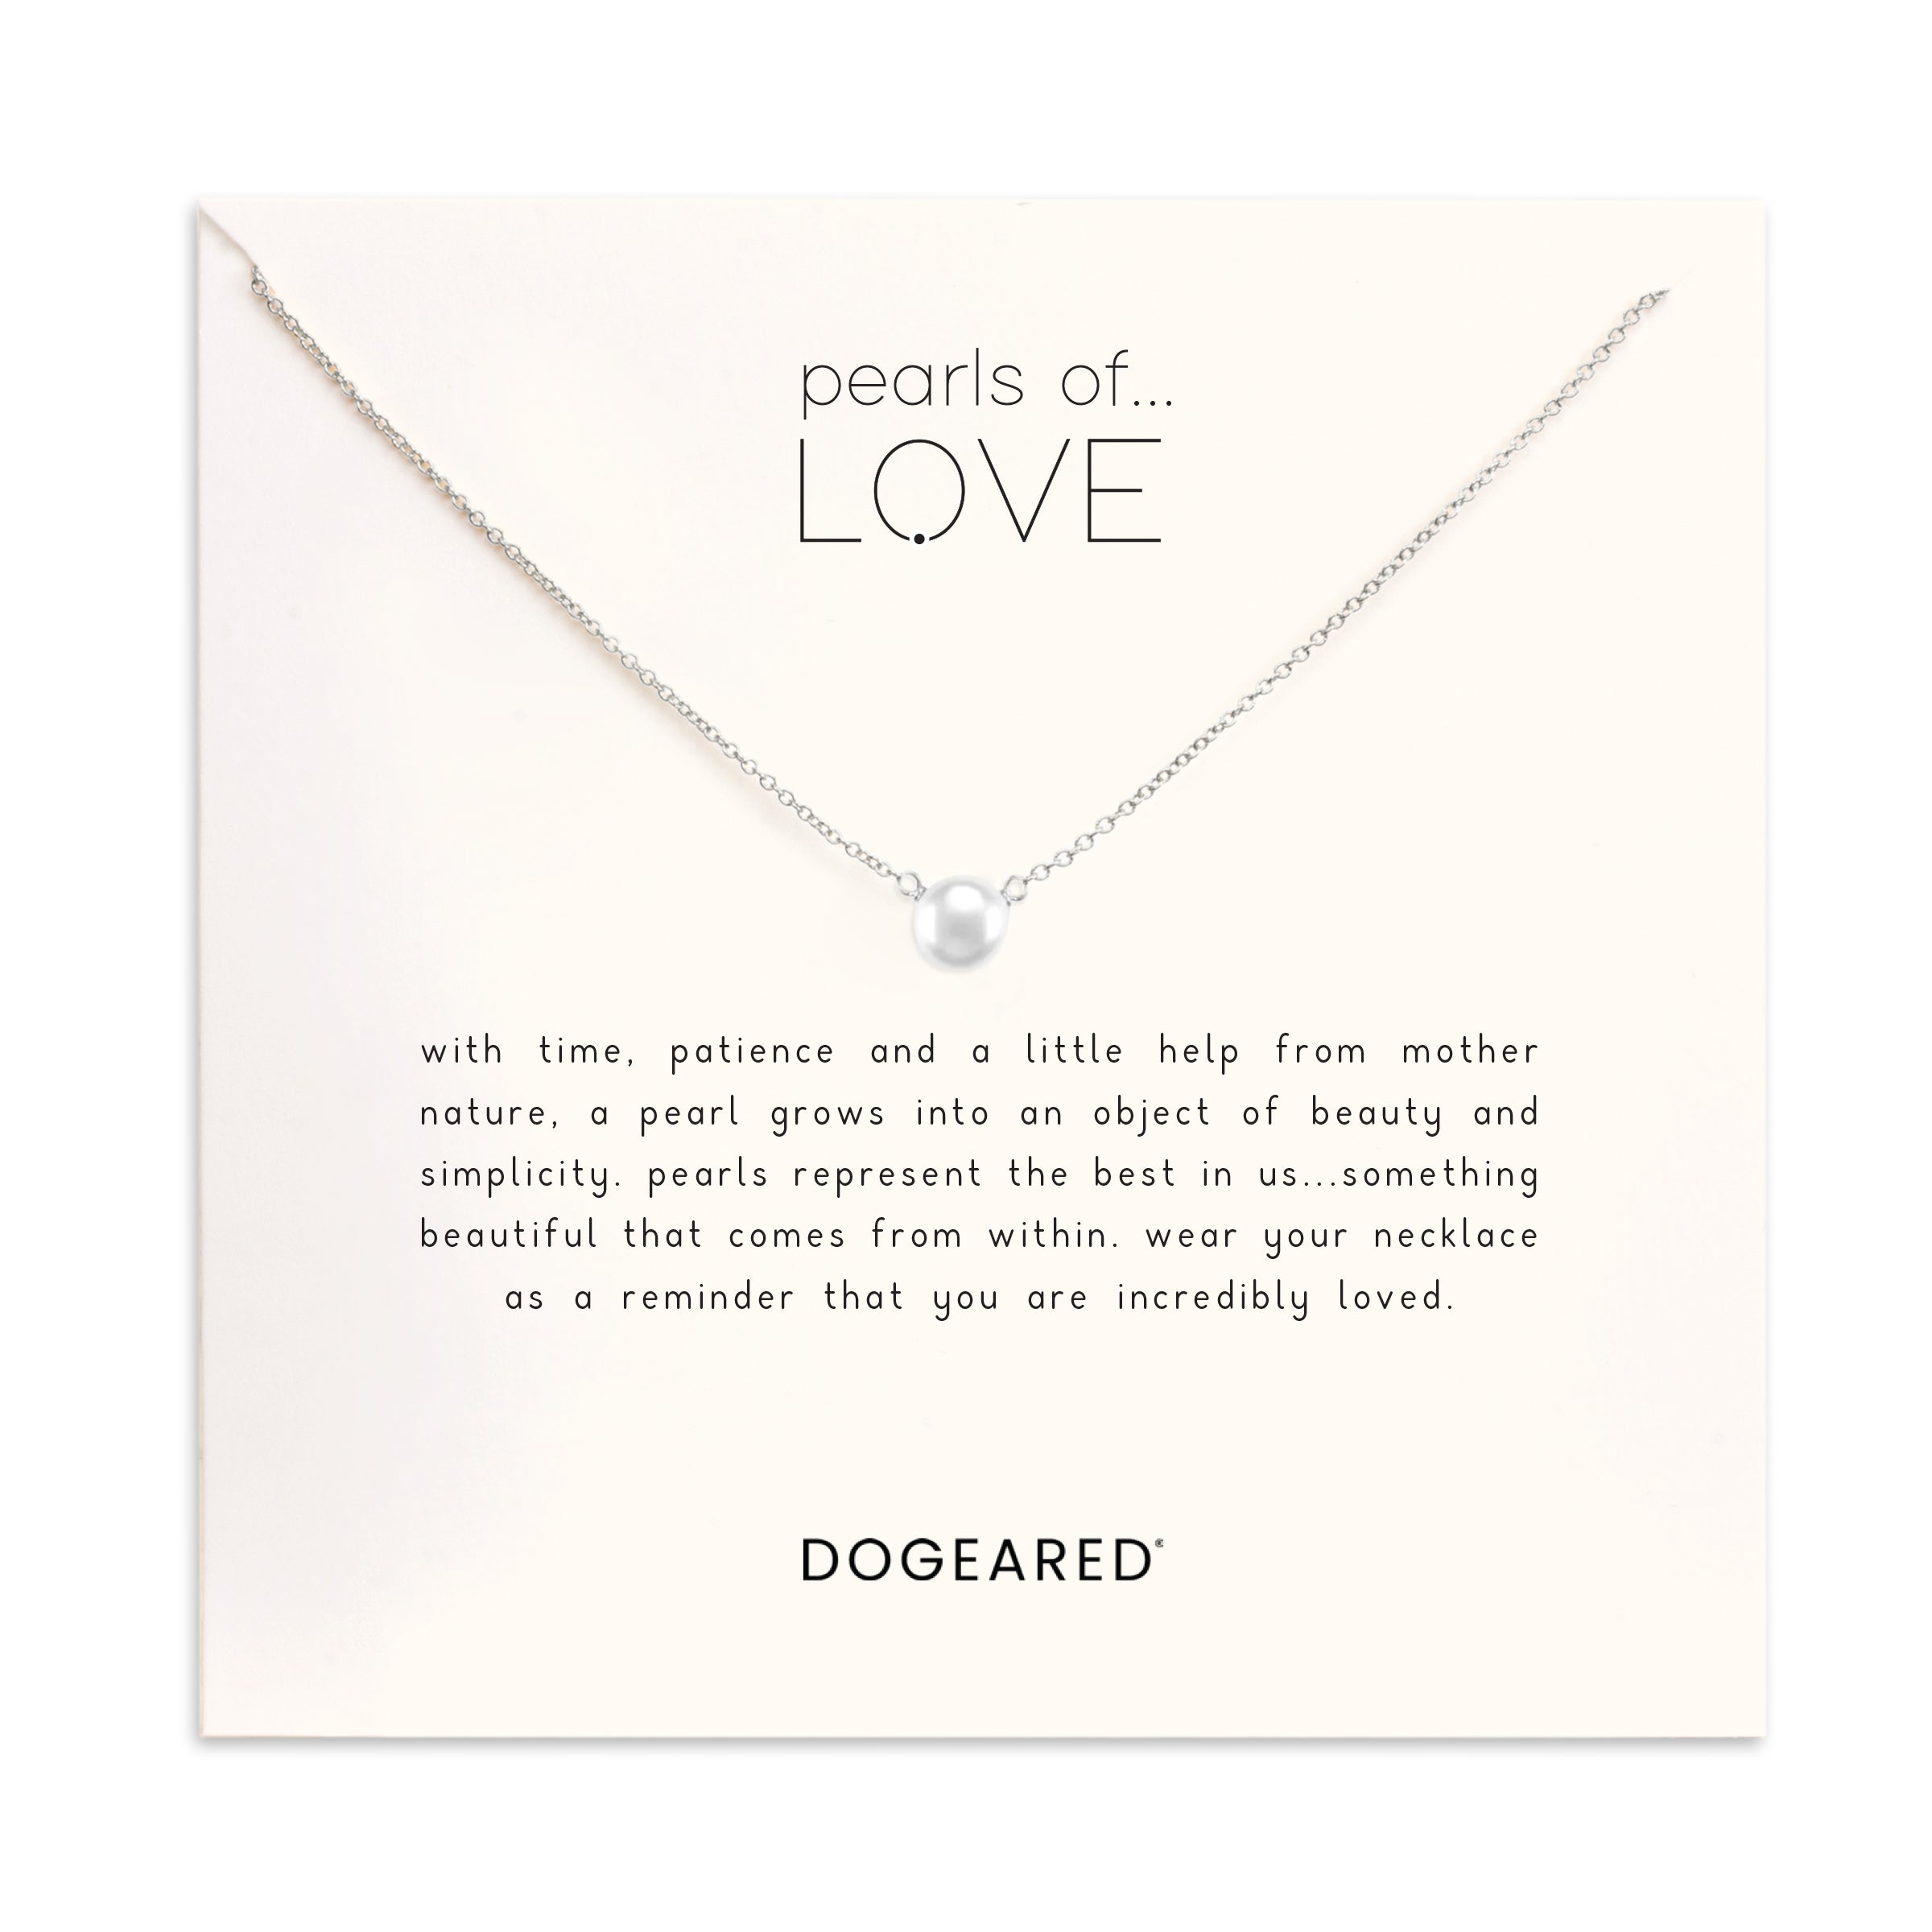 Pearls of love small white pearl necklace